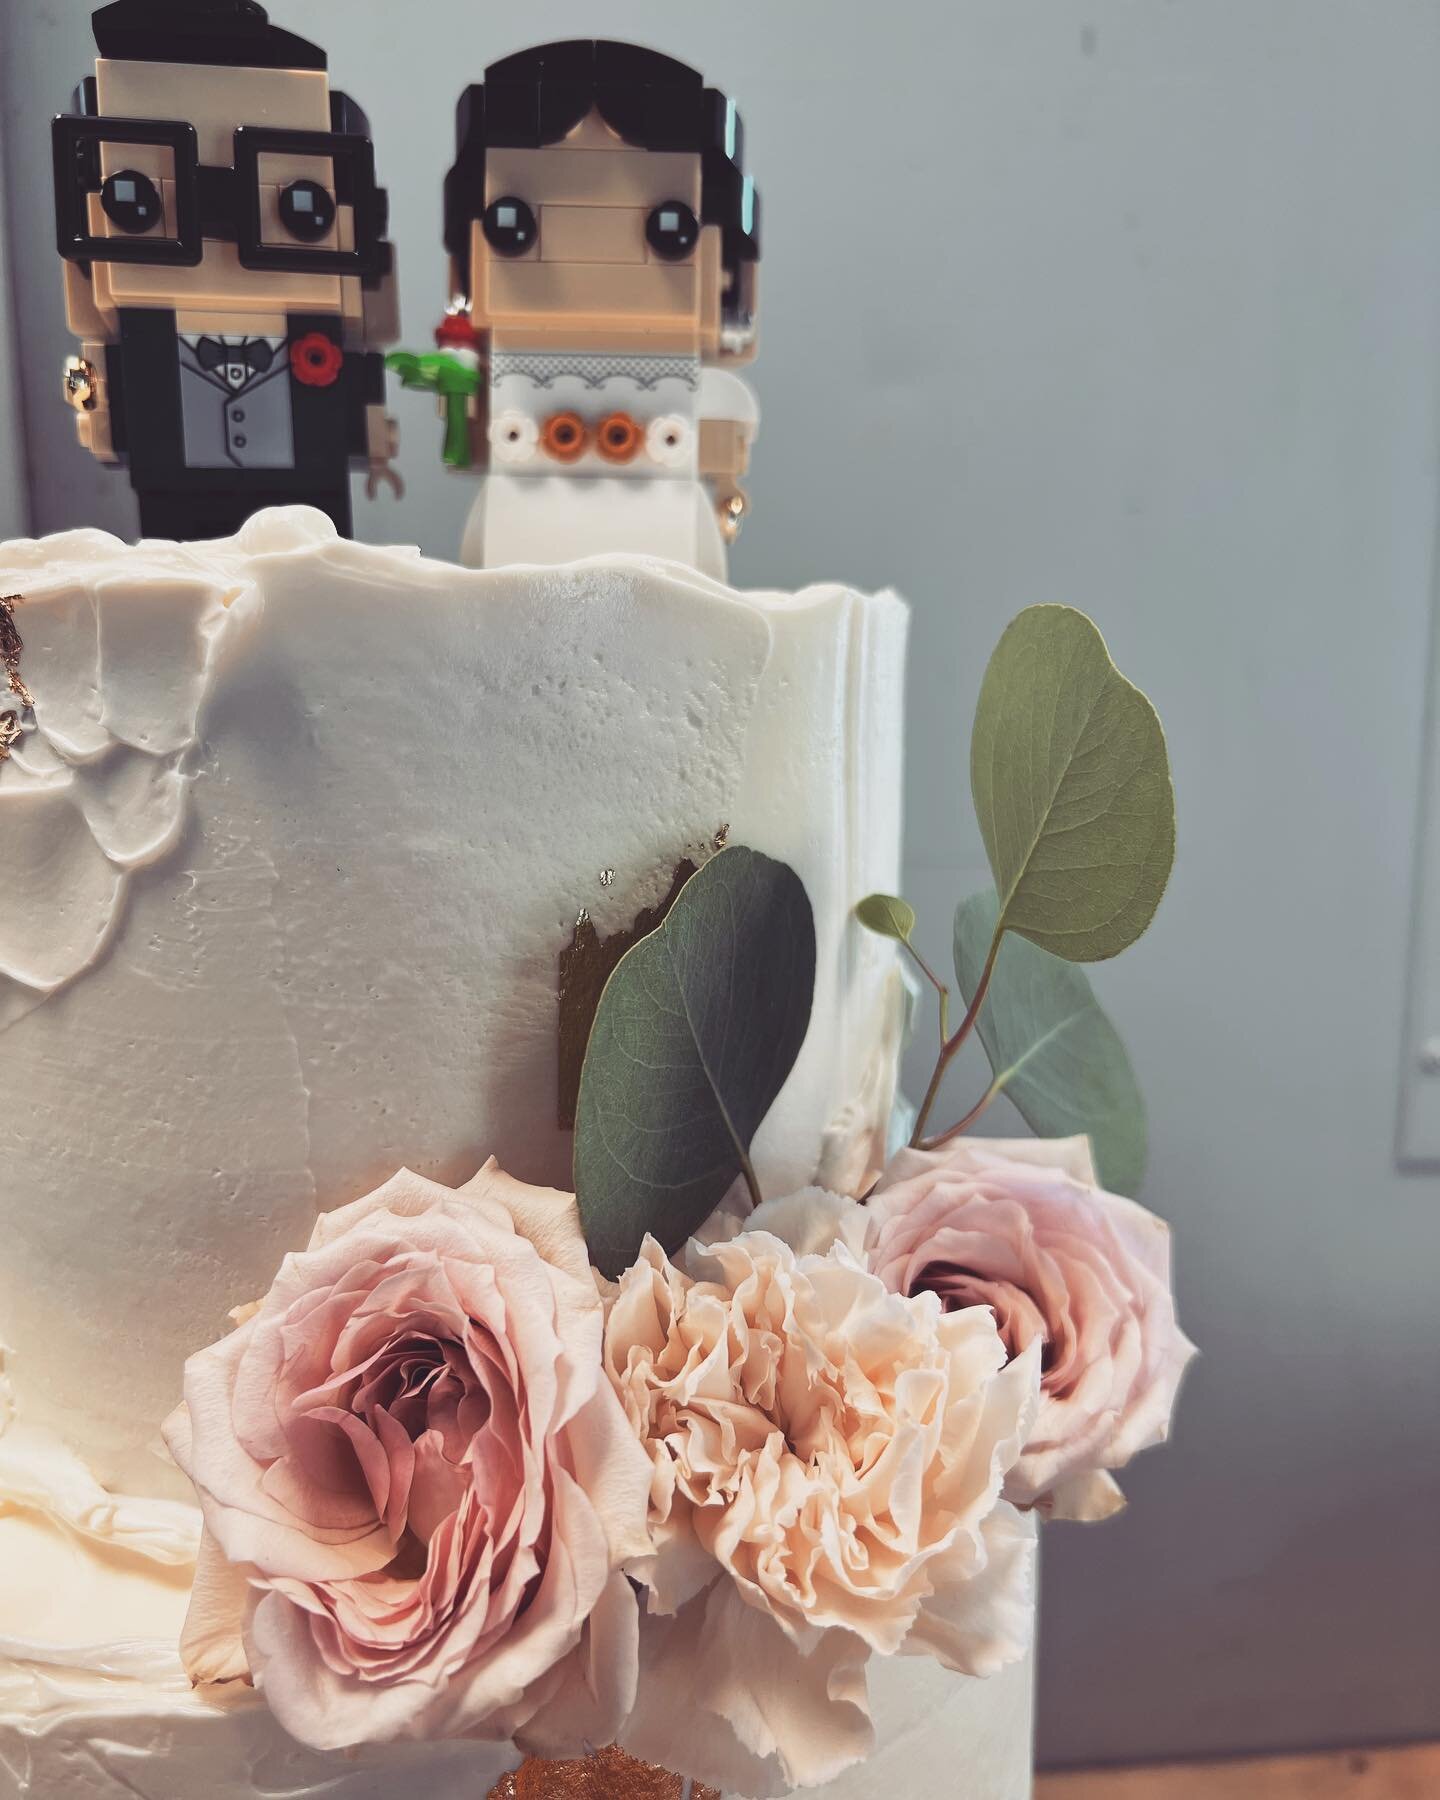 Can&rsquo;t get over this cuteness from a week ago! 😍 Two-tier Ube Cake filled with Ube Halaya and Ube Buttercream and finished with Vanilla Buttercream, fresh blooms and @lego cake topper. ❤️❤️❤️

@celiyme 
@onyboy912 

#sweetcondesaweddings  #dess